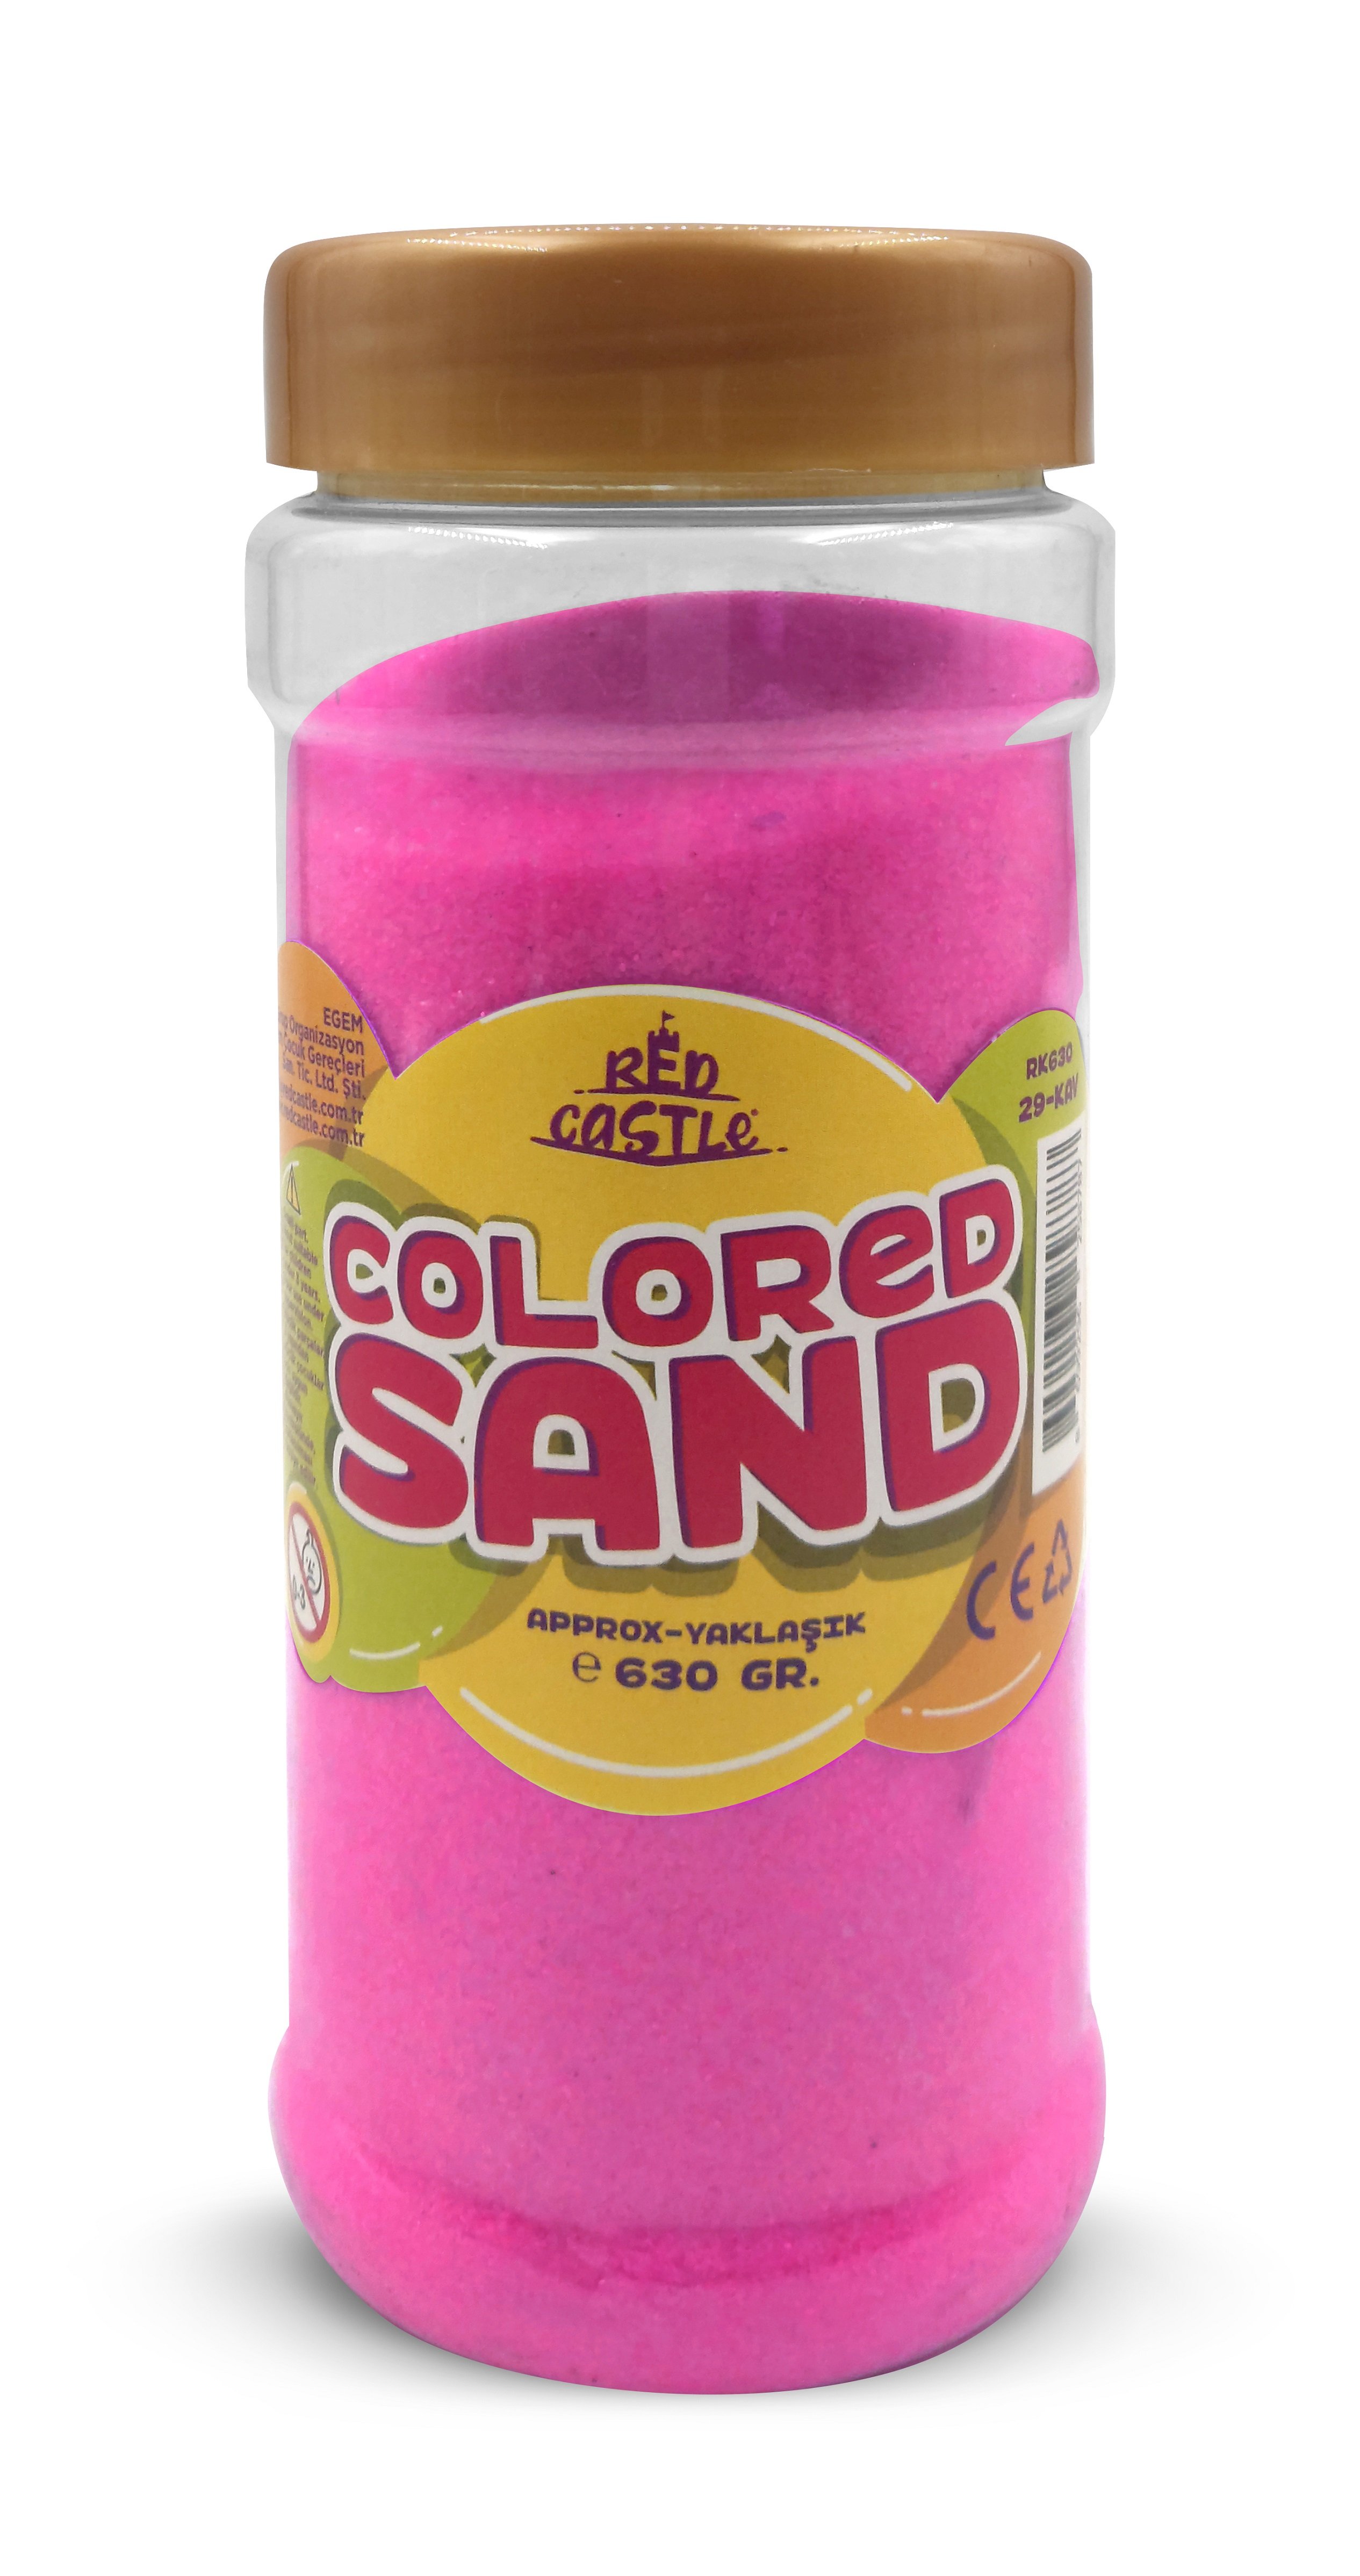 Colored Sand Painting Sand 630 grams-Red Castle RK630-22-KAV